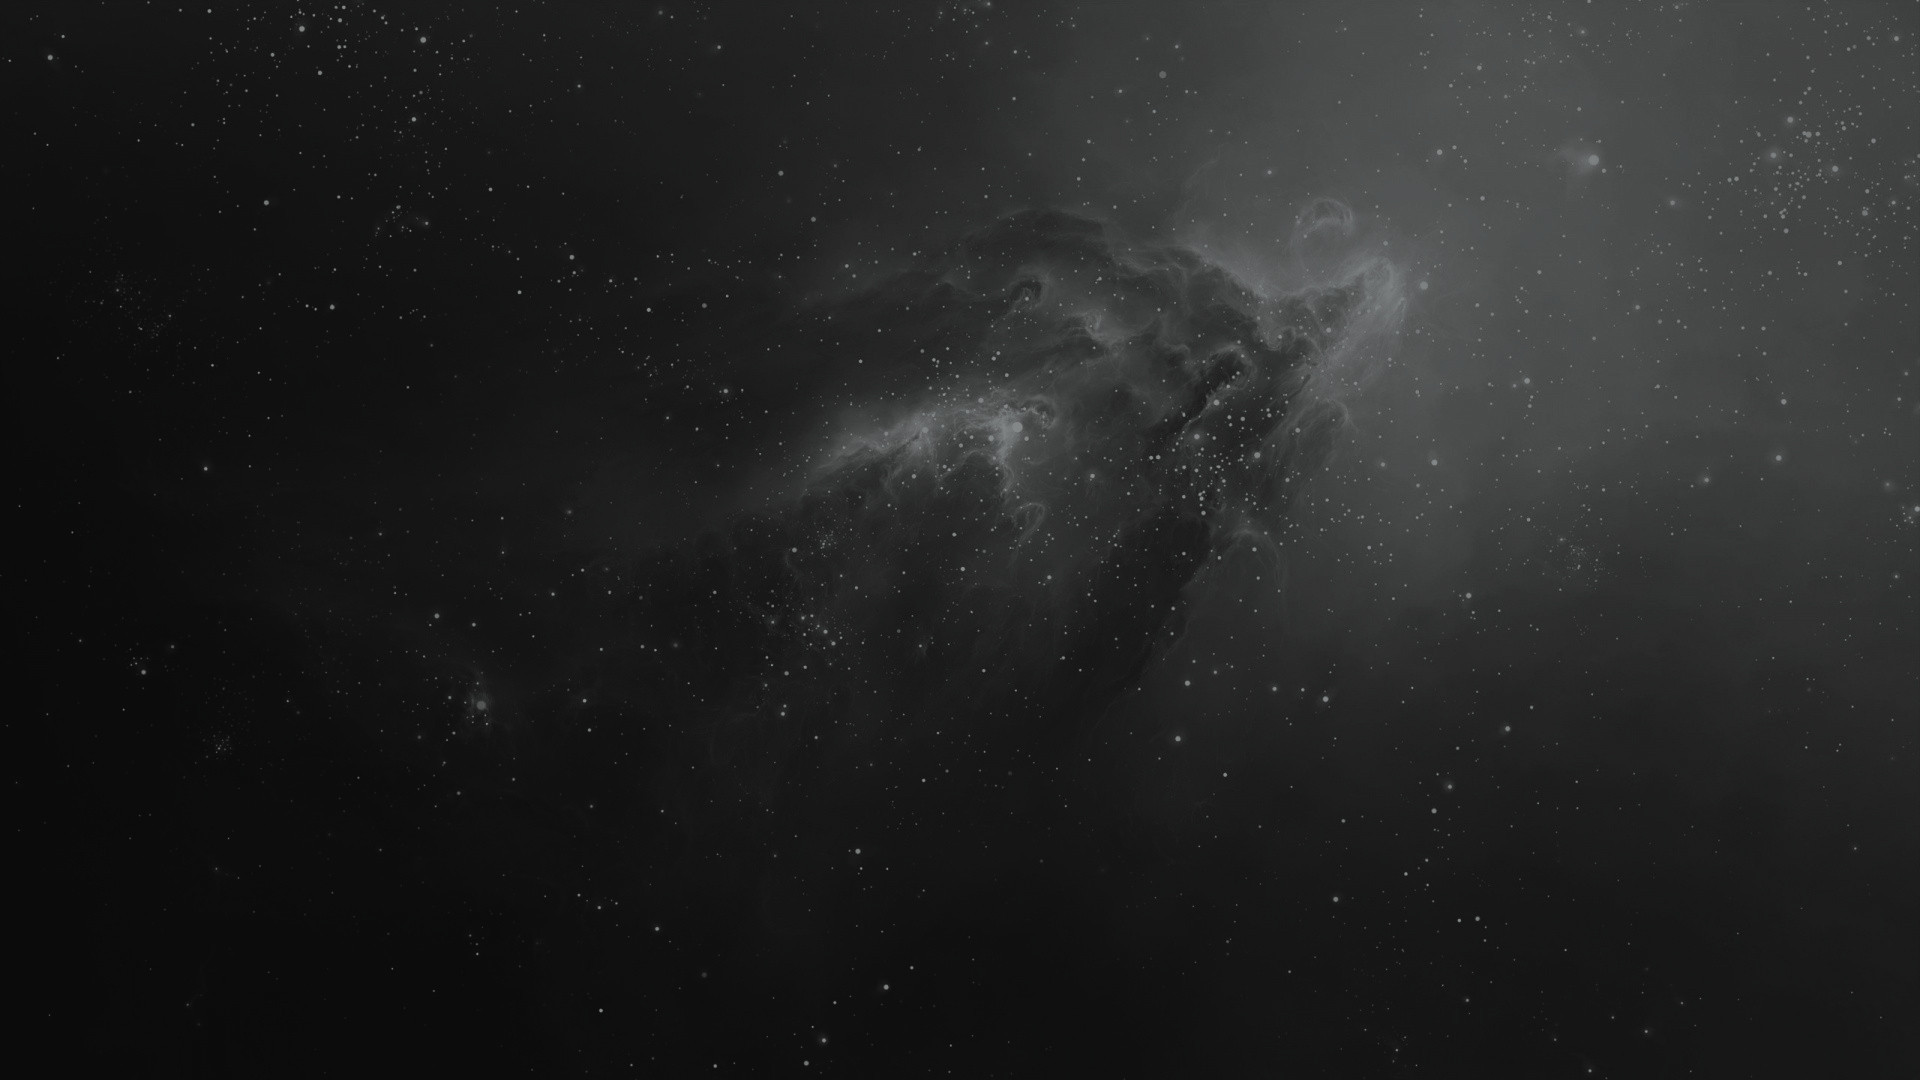 Aesthetic Black Space Wallpapers